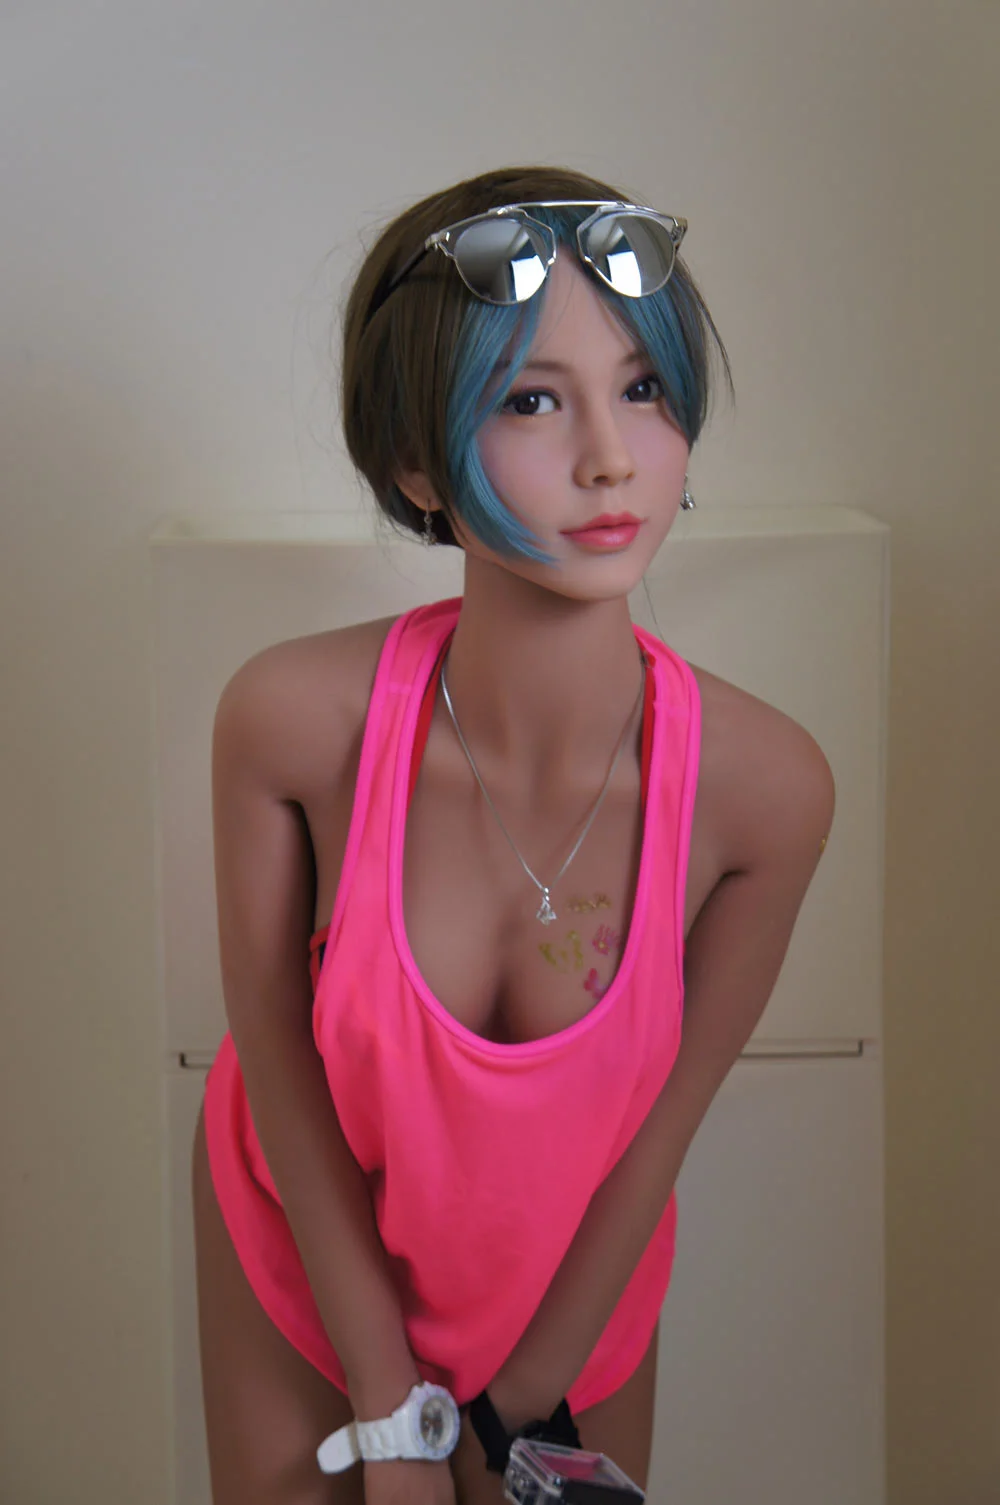 Sex doll with eyes on the head